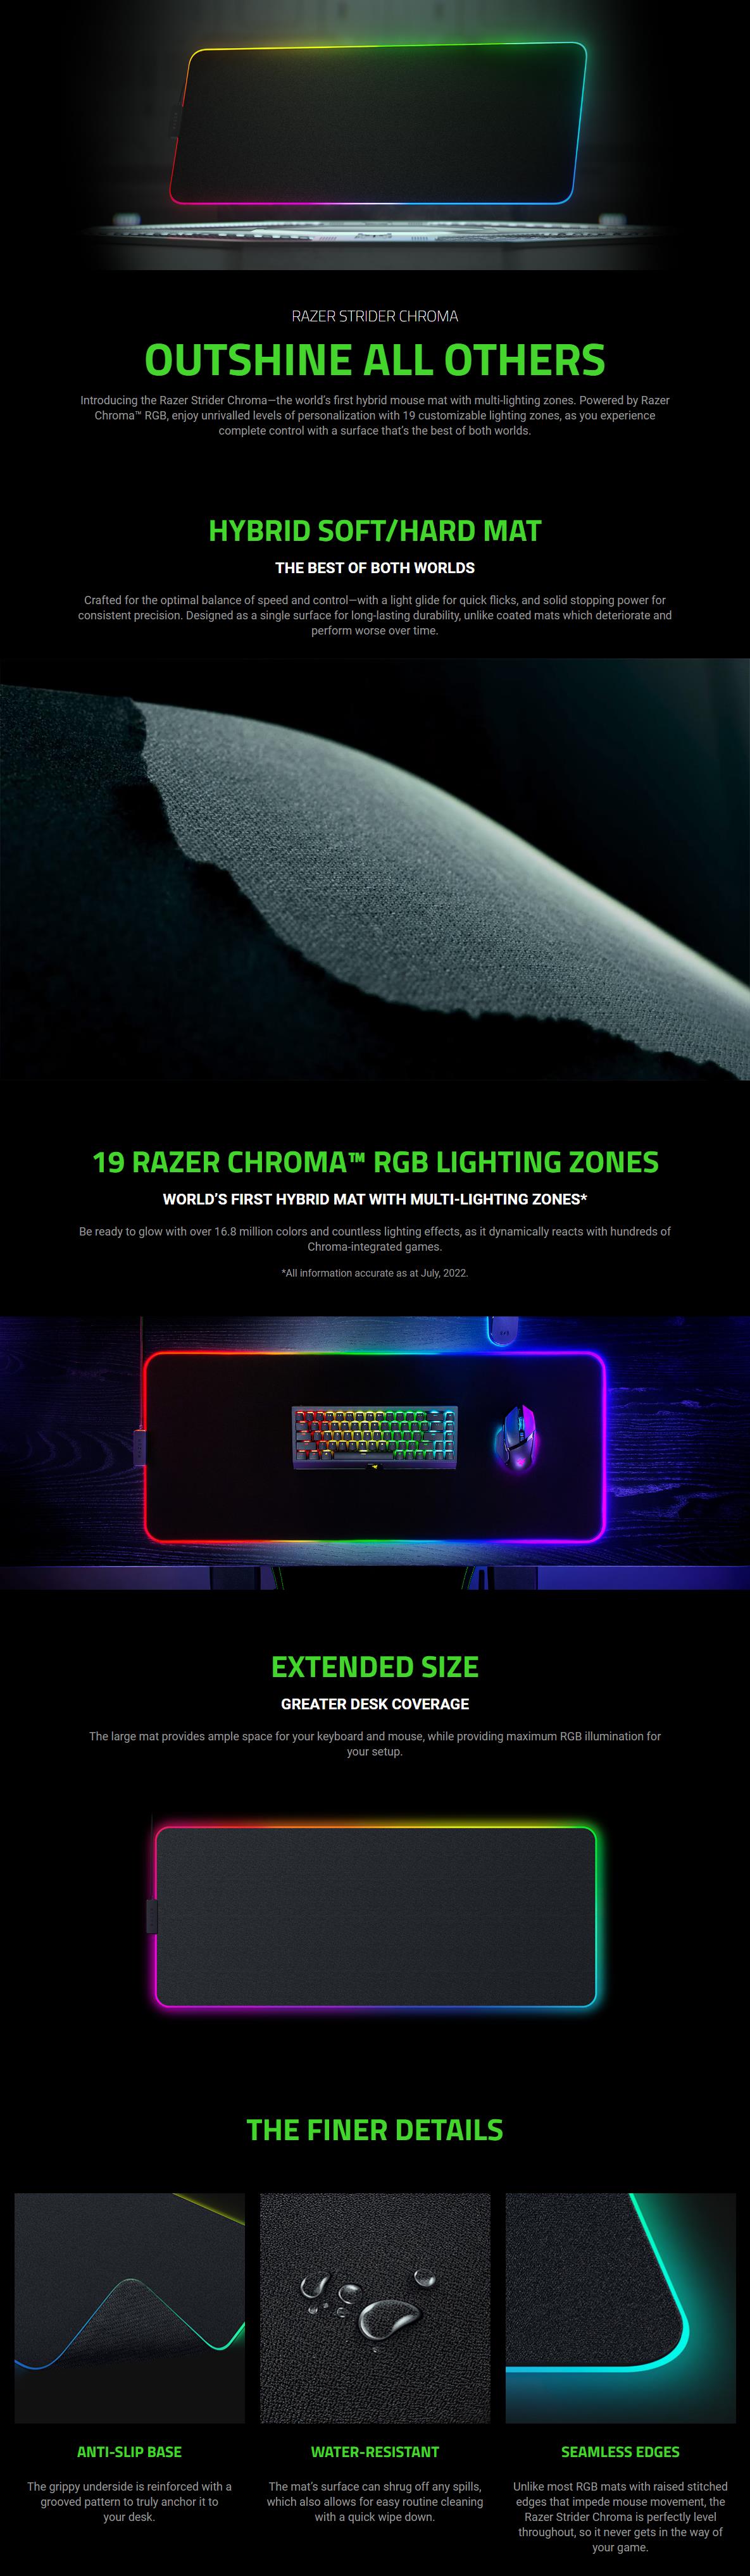 A large marketing image providing additional information about the product Razer Strider Chroma - RGB Gaming Mouse Mat - Additional alt info not provided